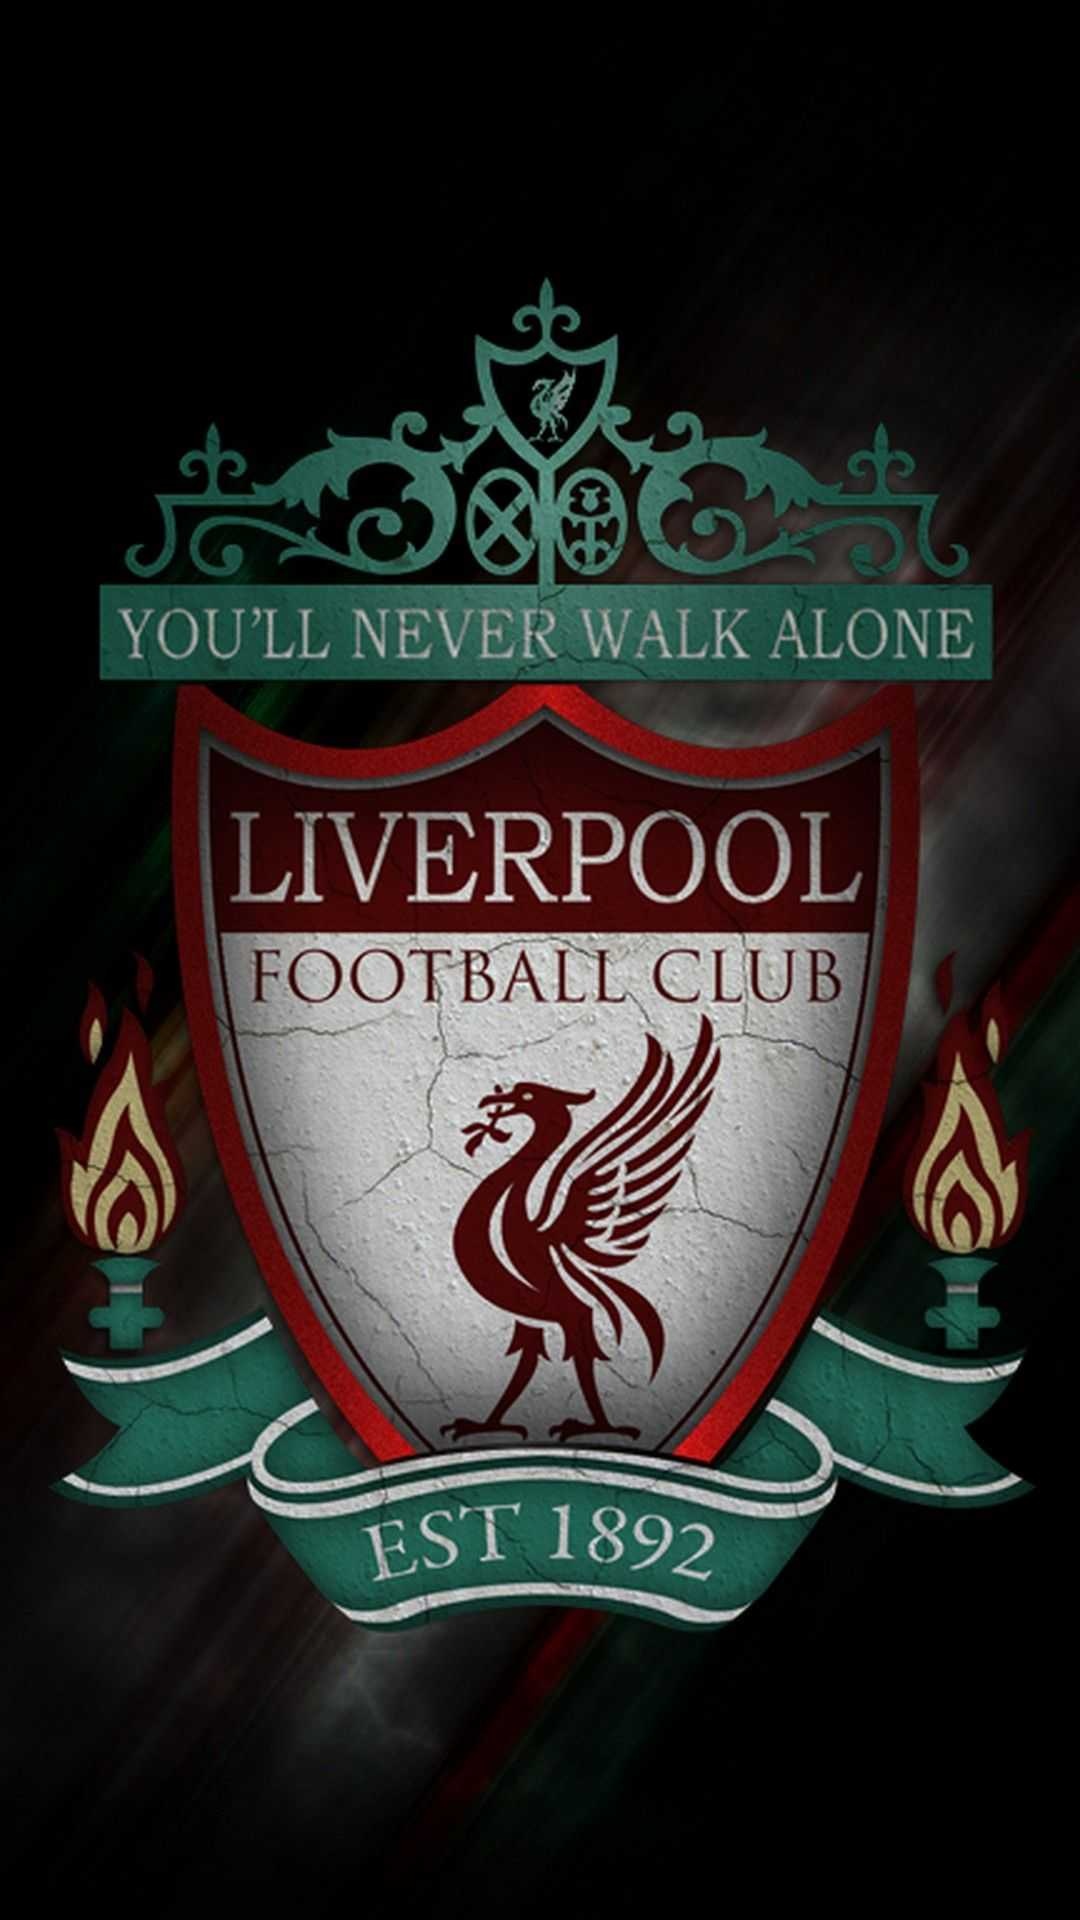 Liverpool Football Club: The iconic LFC history begins in 1892, a number ingrained in the famous crest. 1080x1920 Full HD Background.